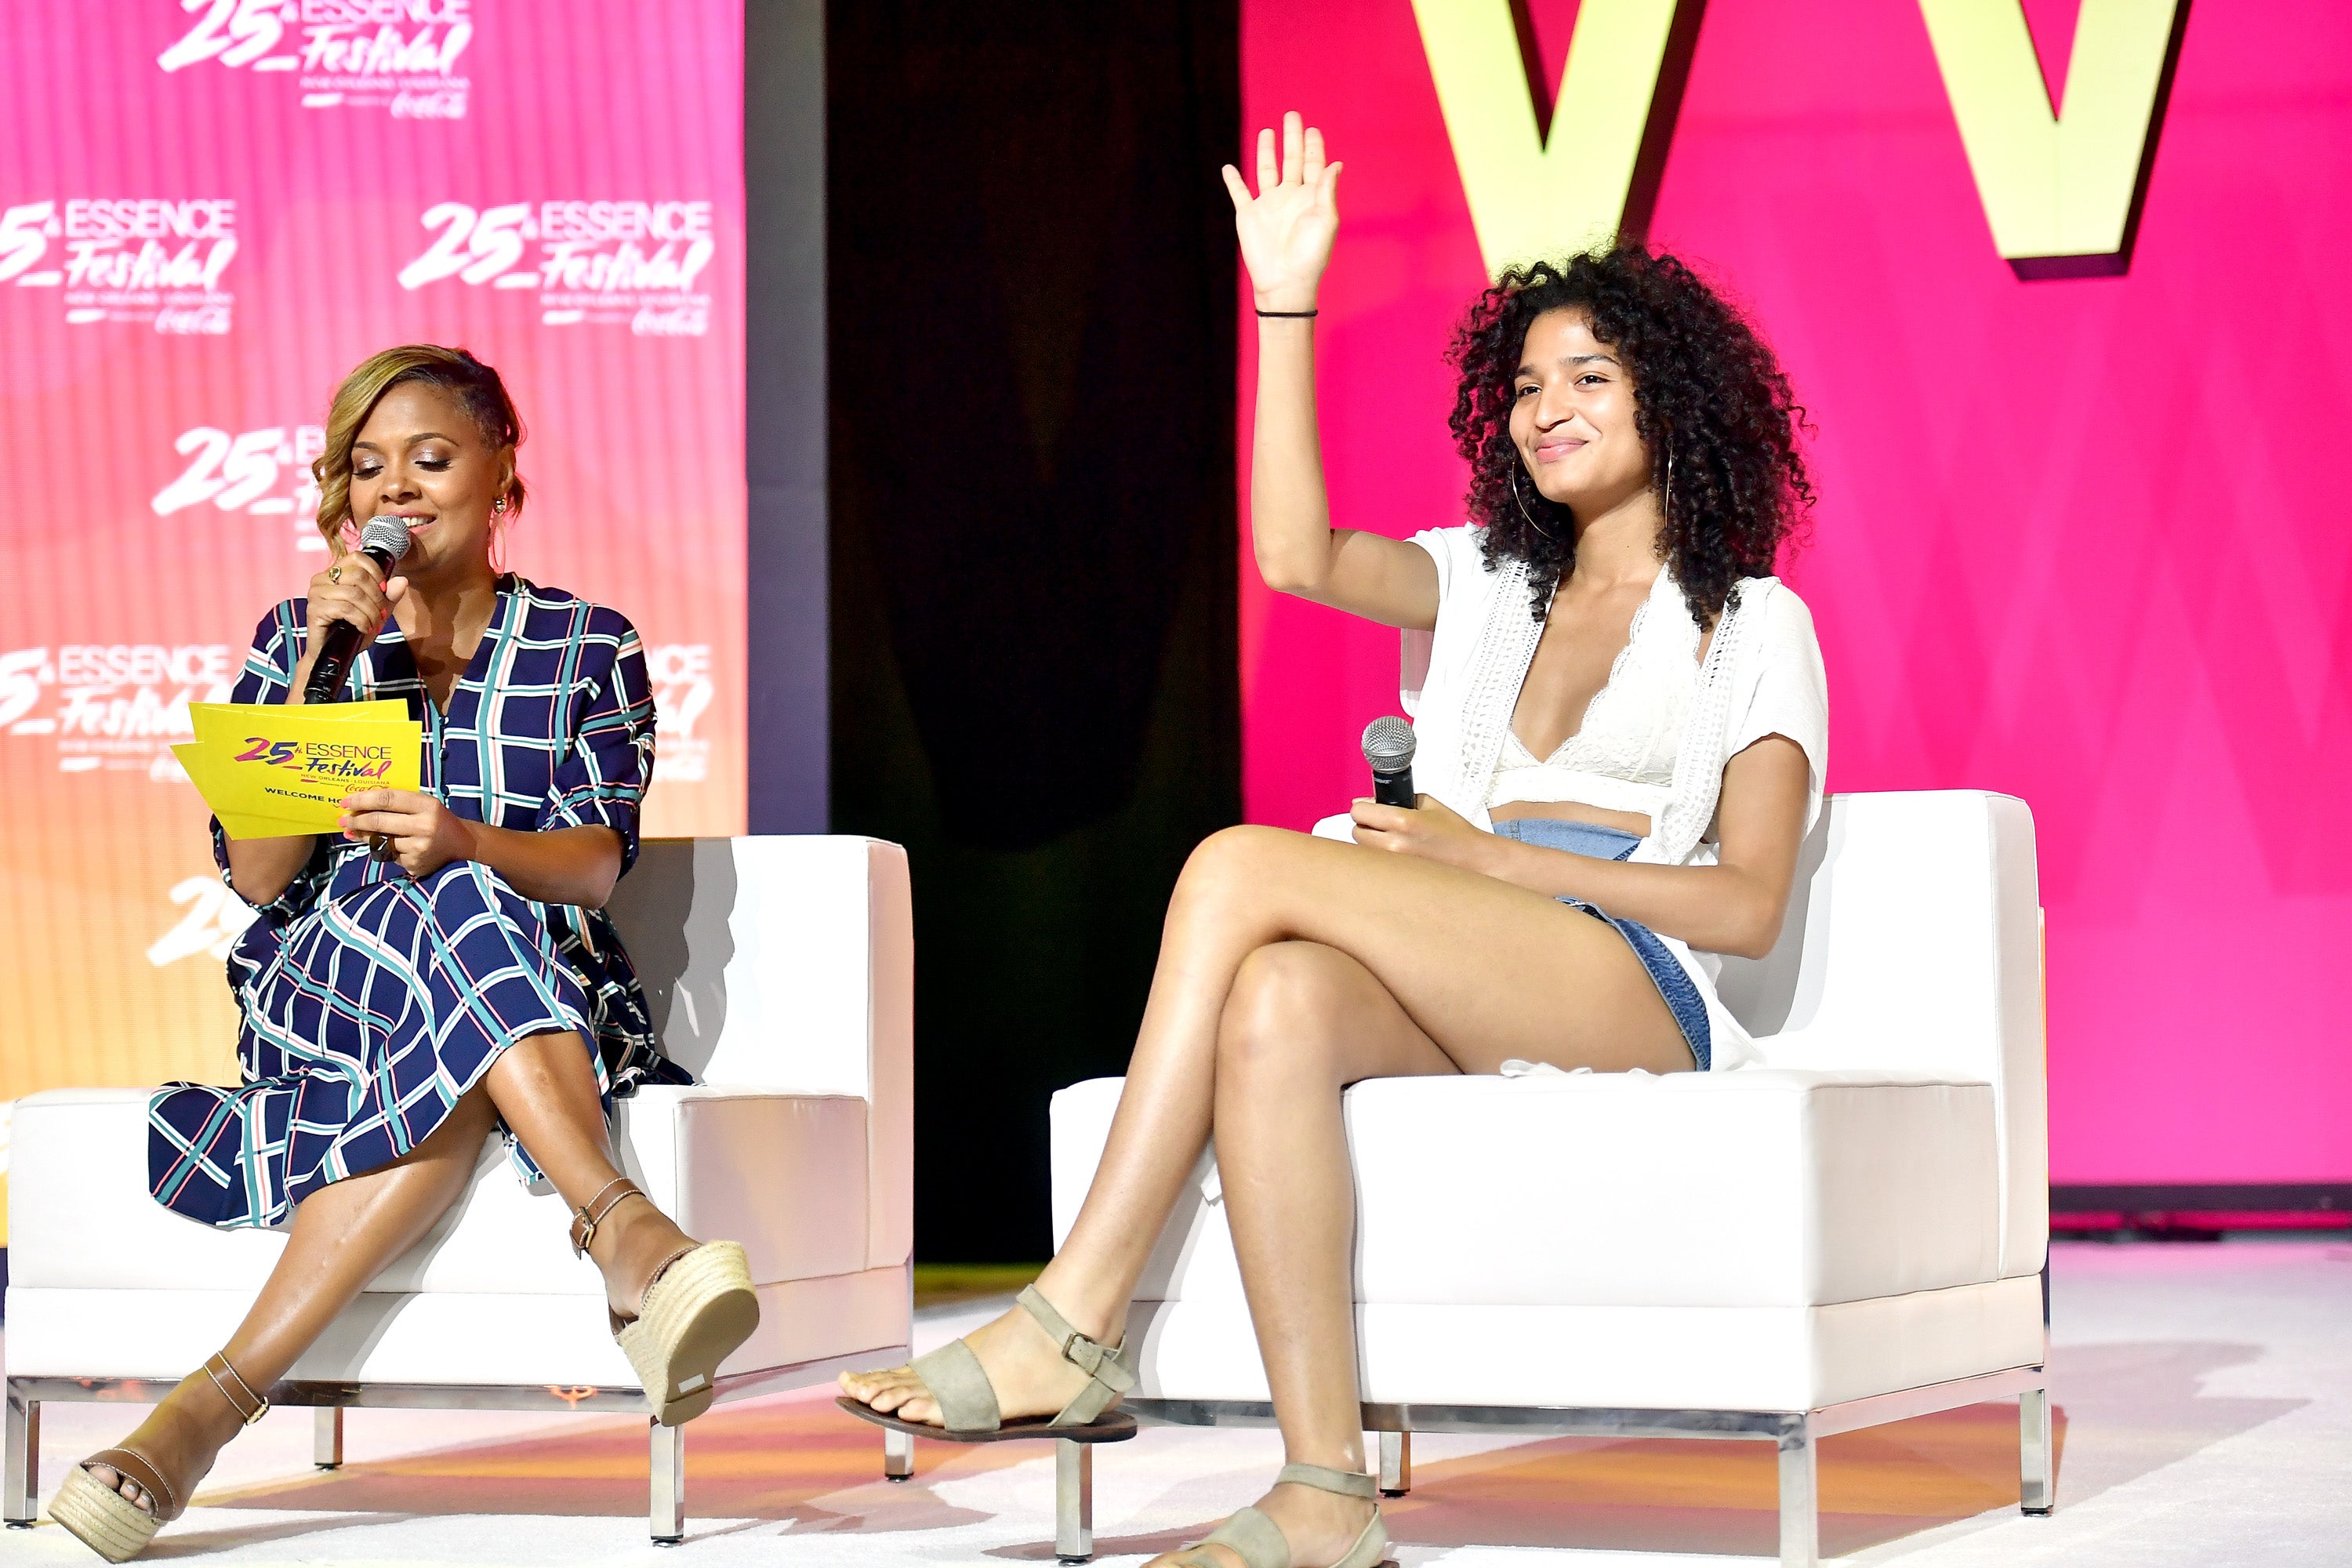 ESSENCE Fest Flashback: The 25 Most Unforgettable Moments From The Year's Biggest Celebration Of Black Culture